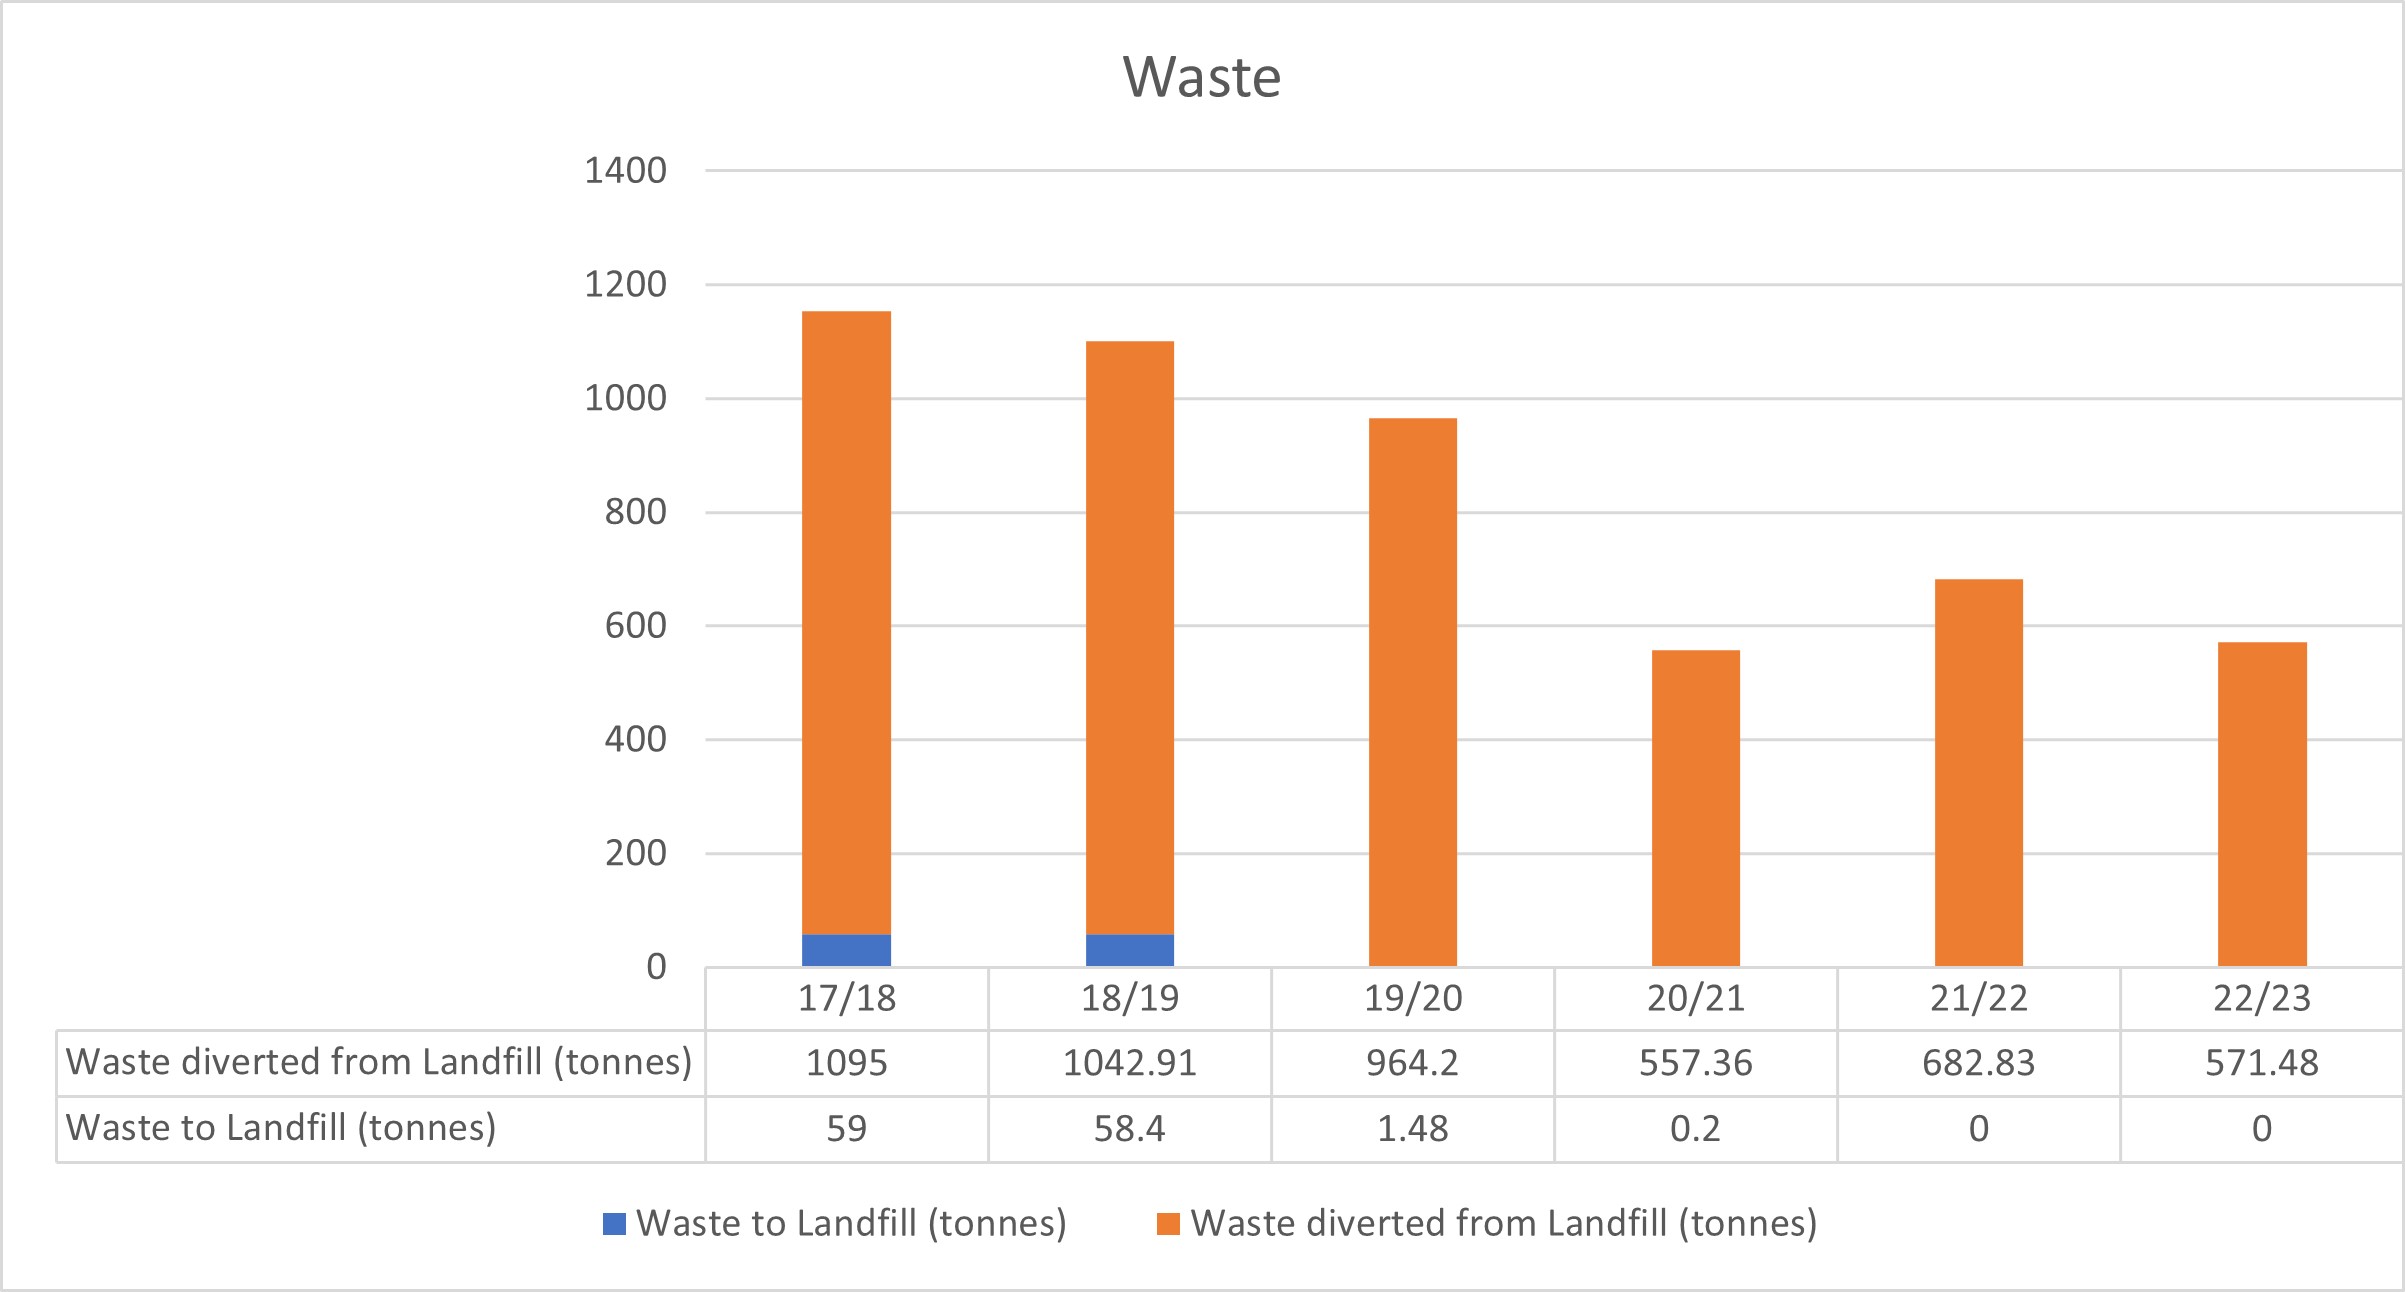 Bar chart showing NHSBSA waste to landfill and diverted from landfill, by year